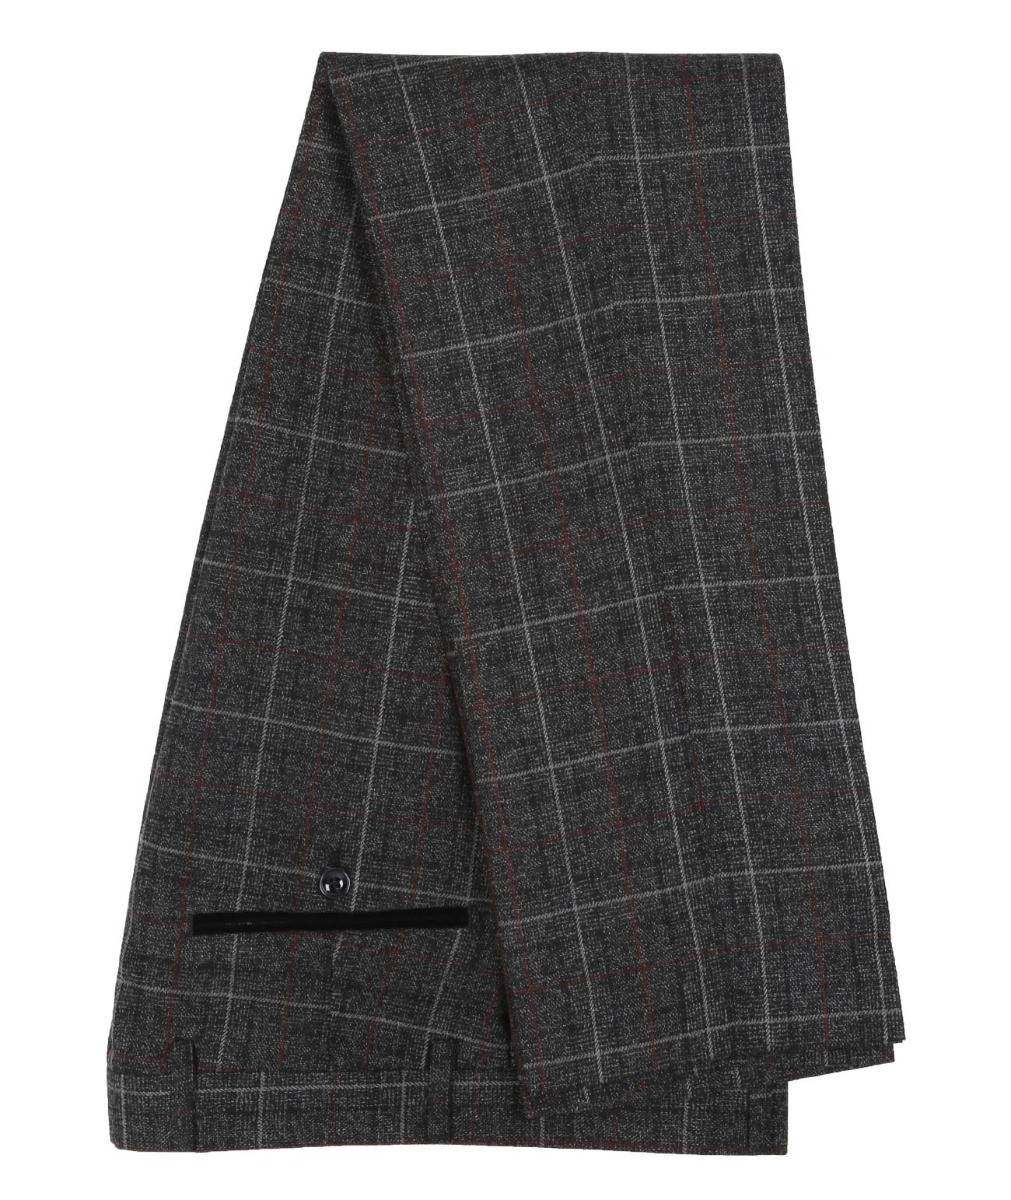 Men's Check Plaid Formal Trousers - HARVEY - Charcoal Grey